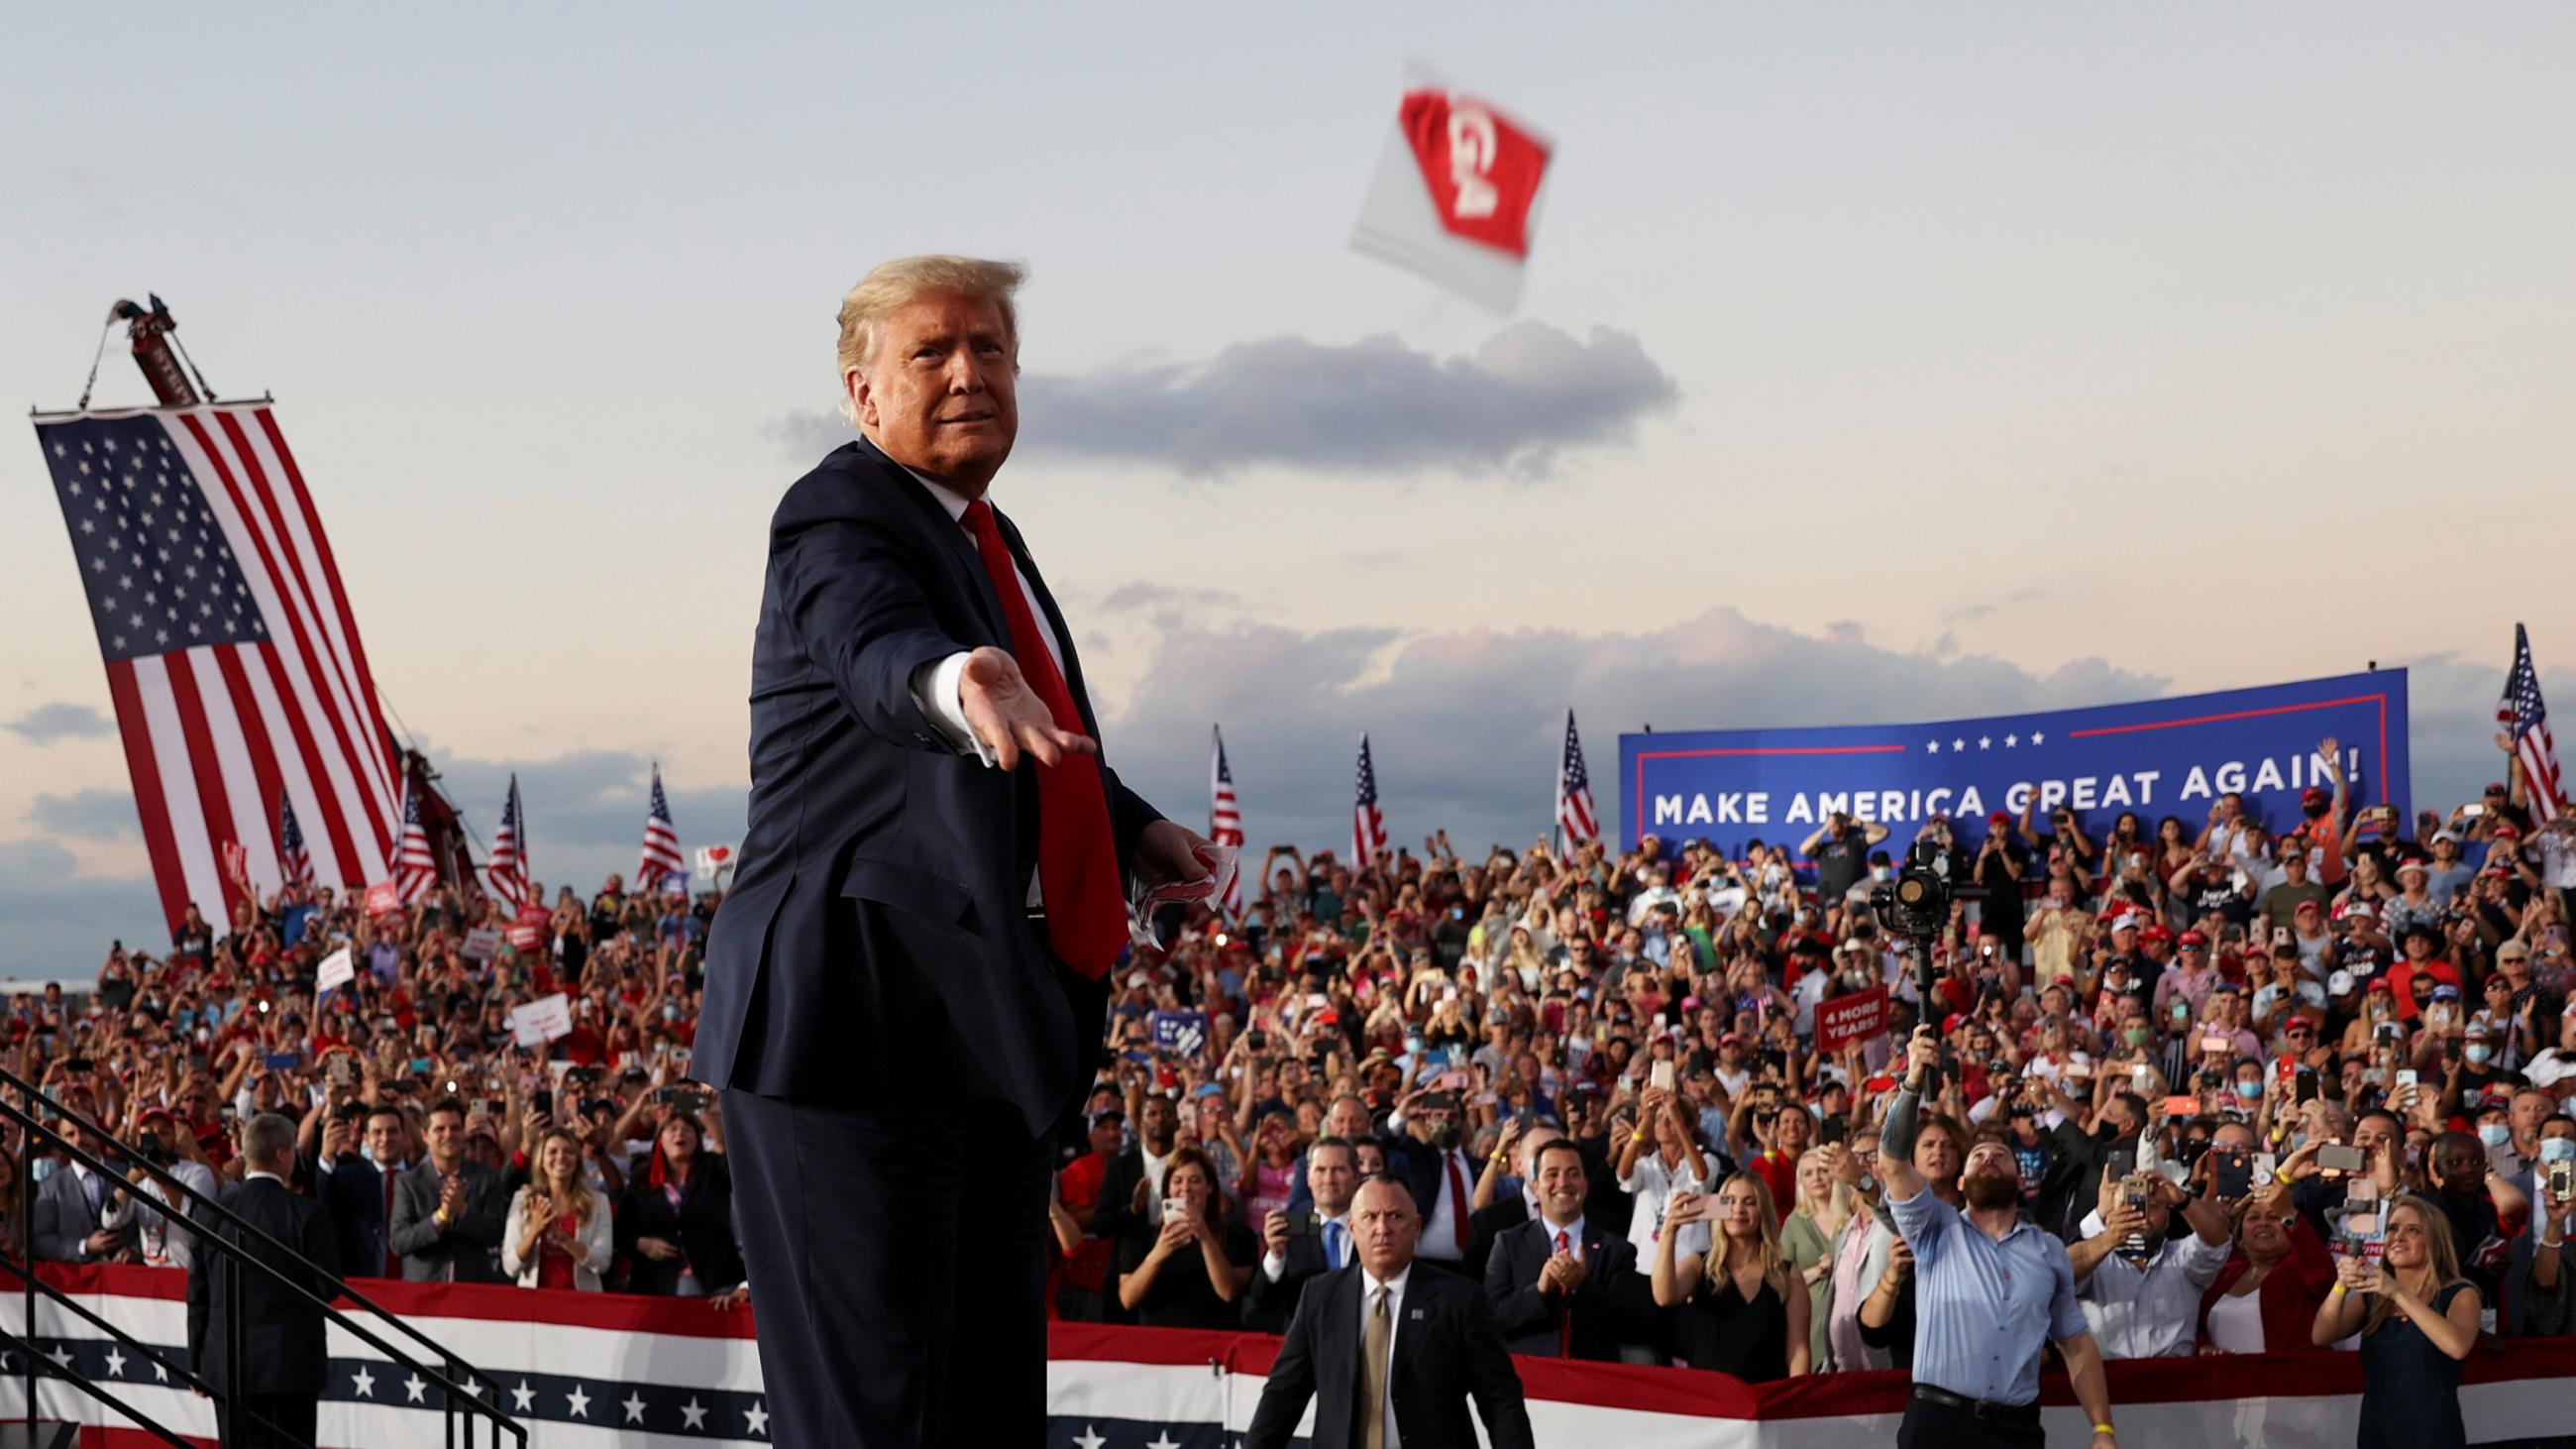 The photo shows the president tossing a mask that appears to have "MAGA" written on it against a backdrop of a large crowd of cheering people, many of whom can be seen not wearing masks. 